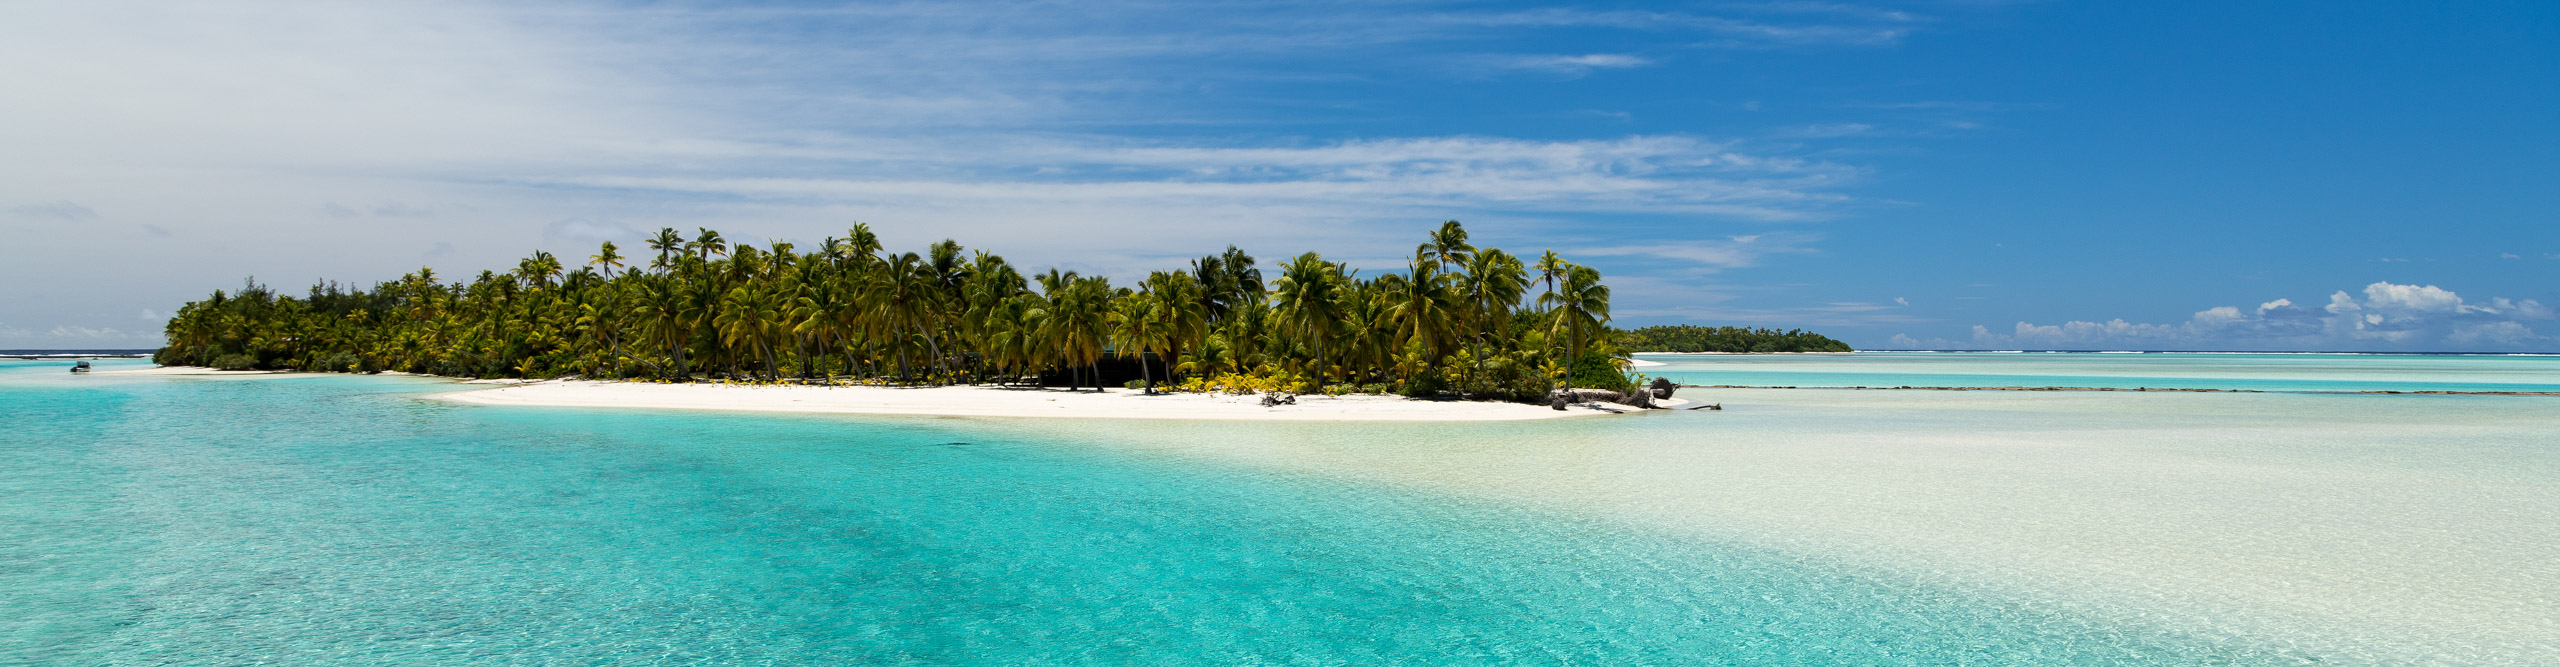 One foot island, with pure white sand, crystal lear waters and palm trees, Aitutaki, Cook Islands